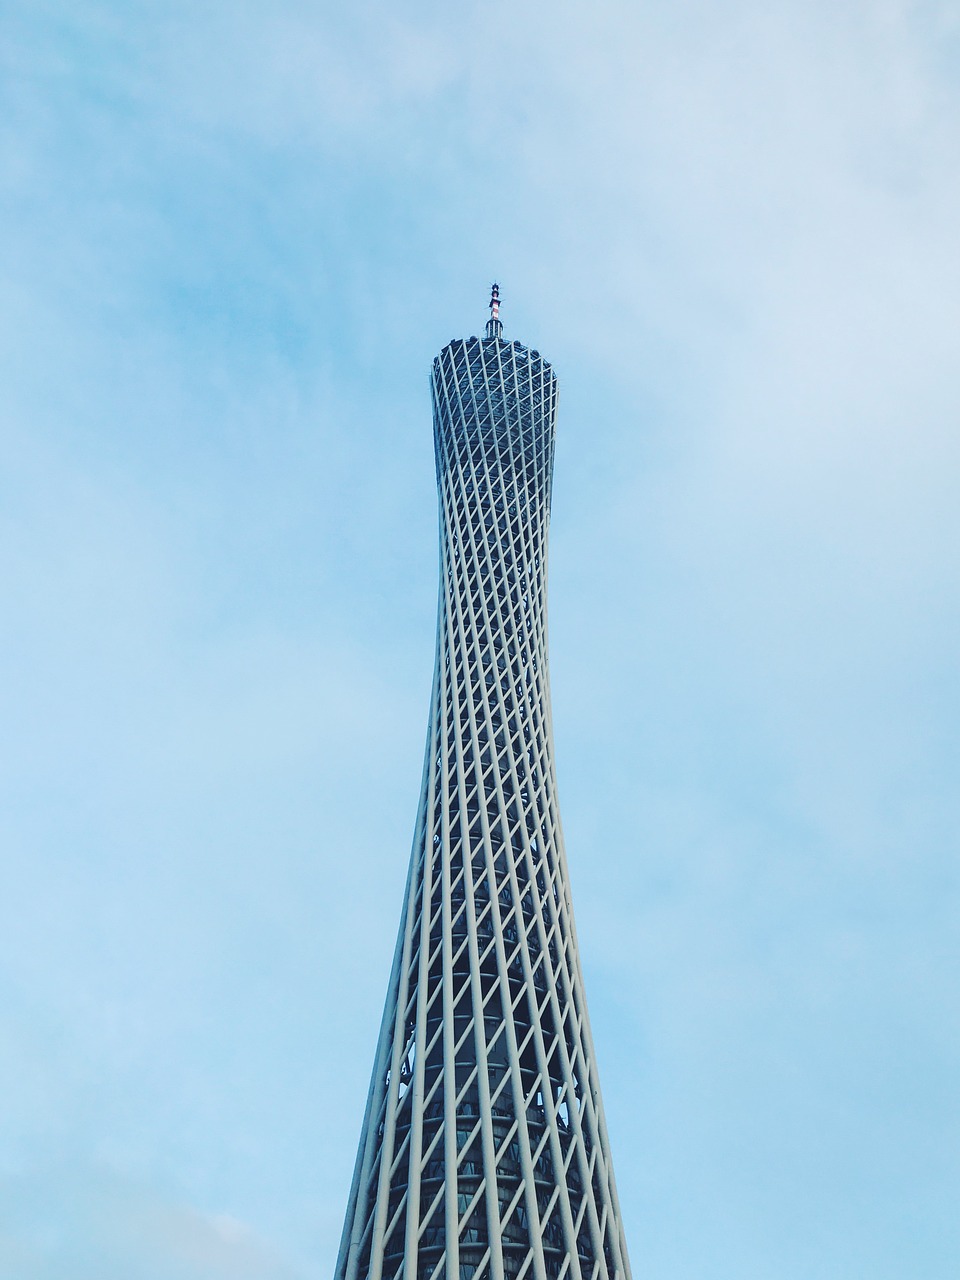 canton  pearl river  canton tower free photo